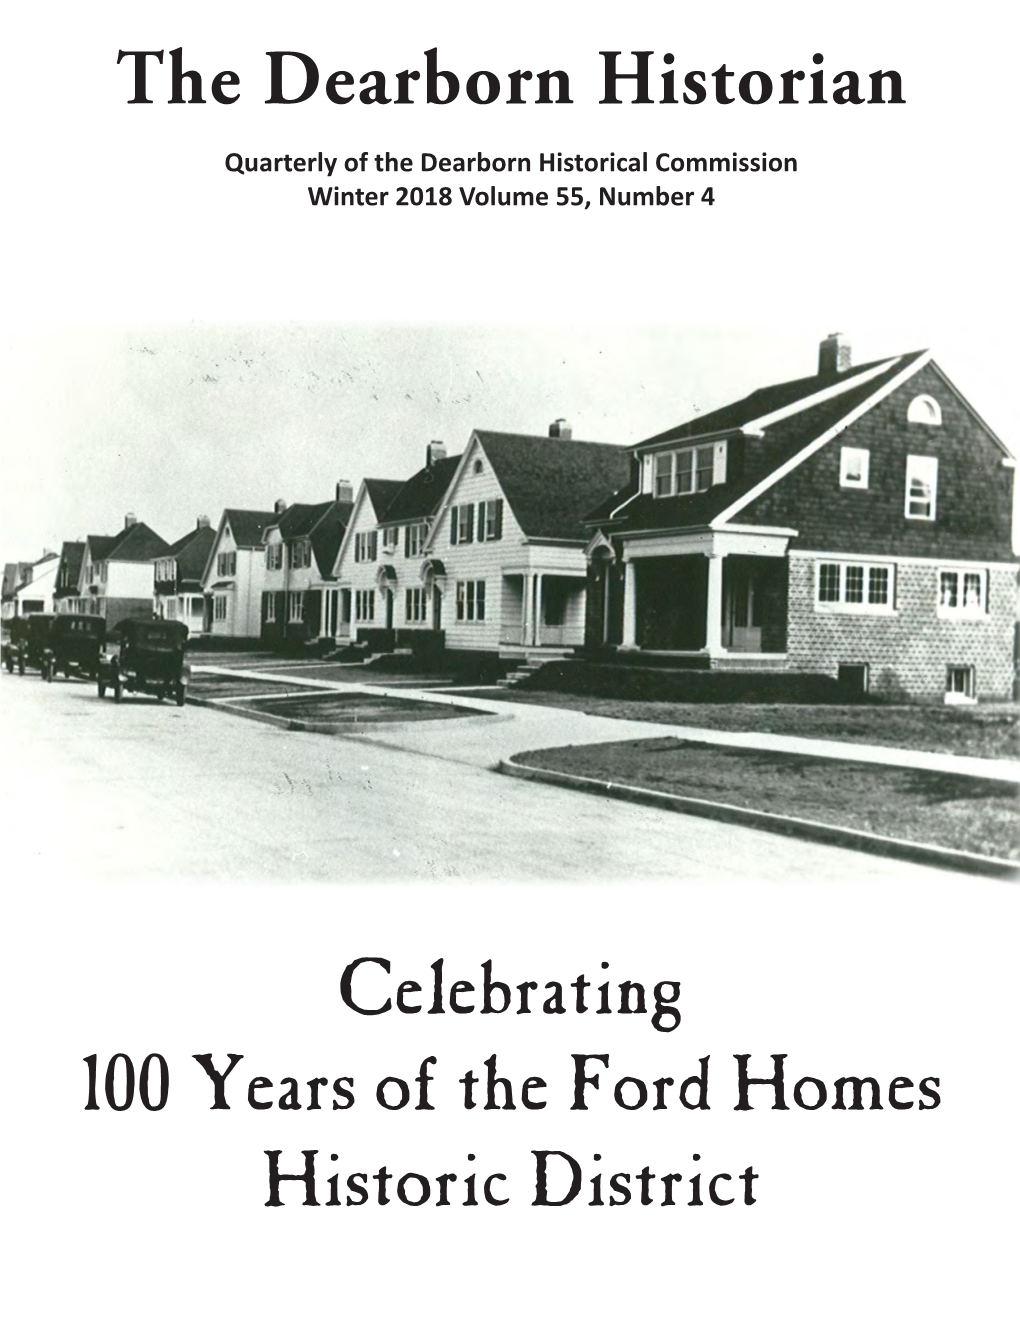 Celebrating 100 Years of the Ford Homes Historic District